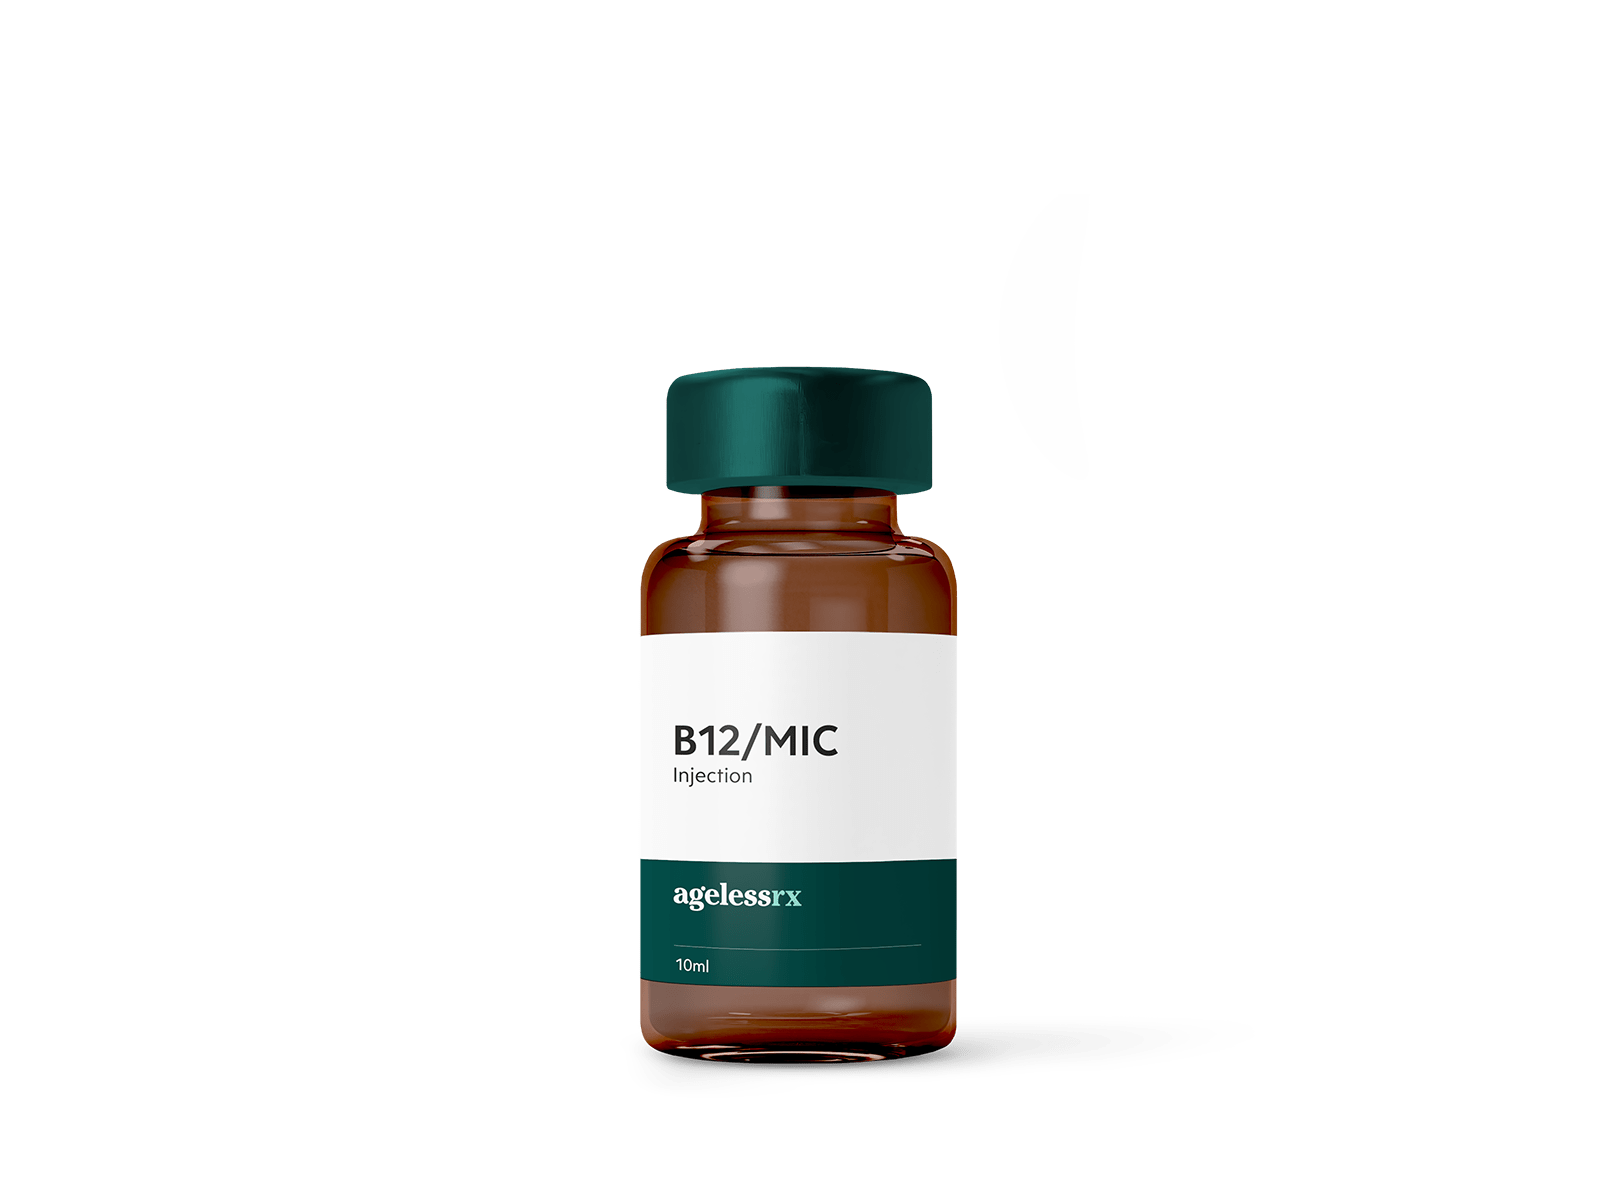 Product image for B12/MIC Injection